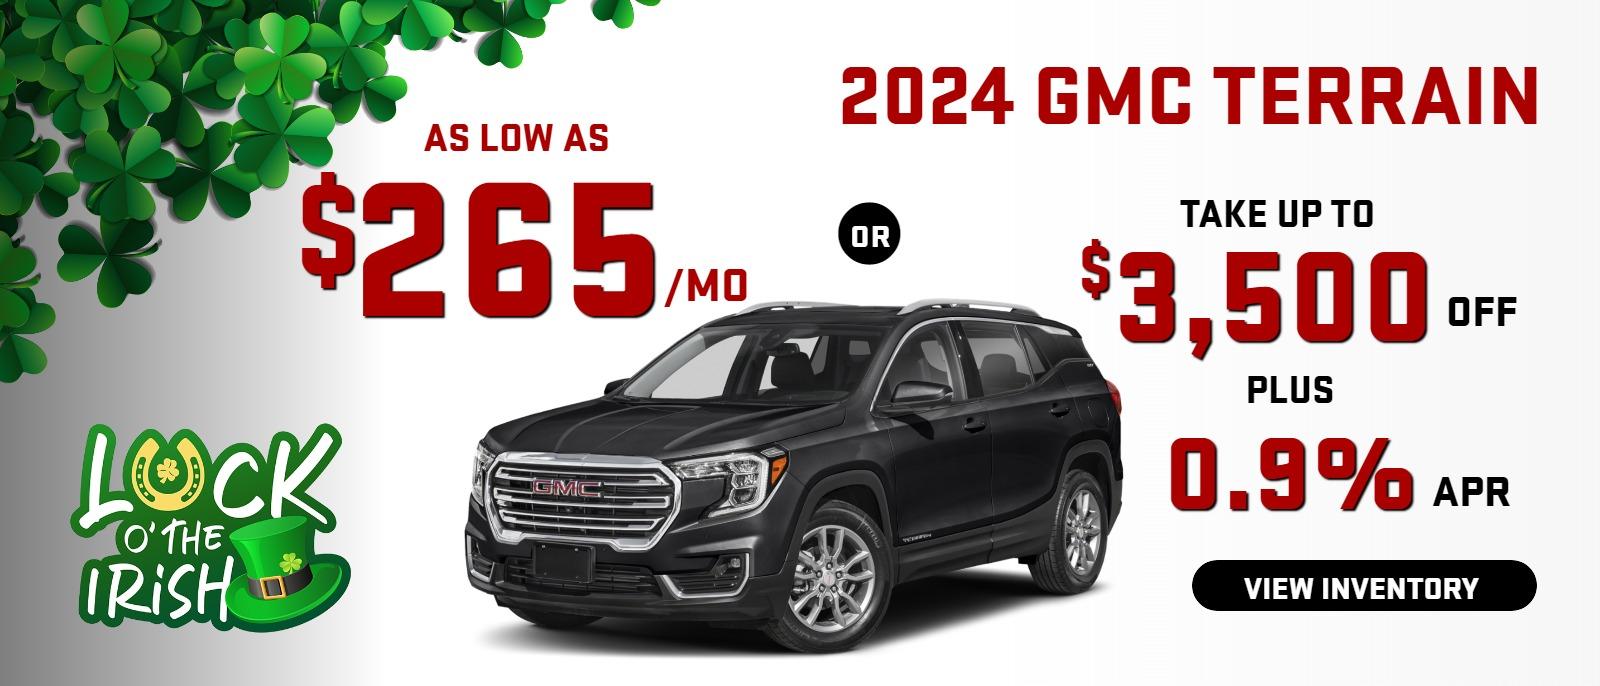 2024 GMC Terrain
stock G2966
take up to $3500 OFF 
OR AS LOW AS
 $265/MO
& 0.9% FINANCE